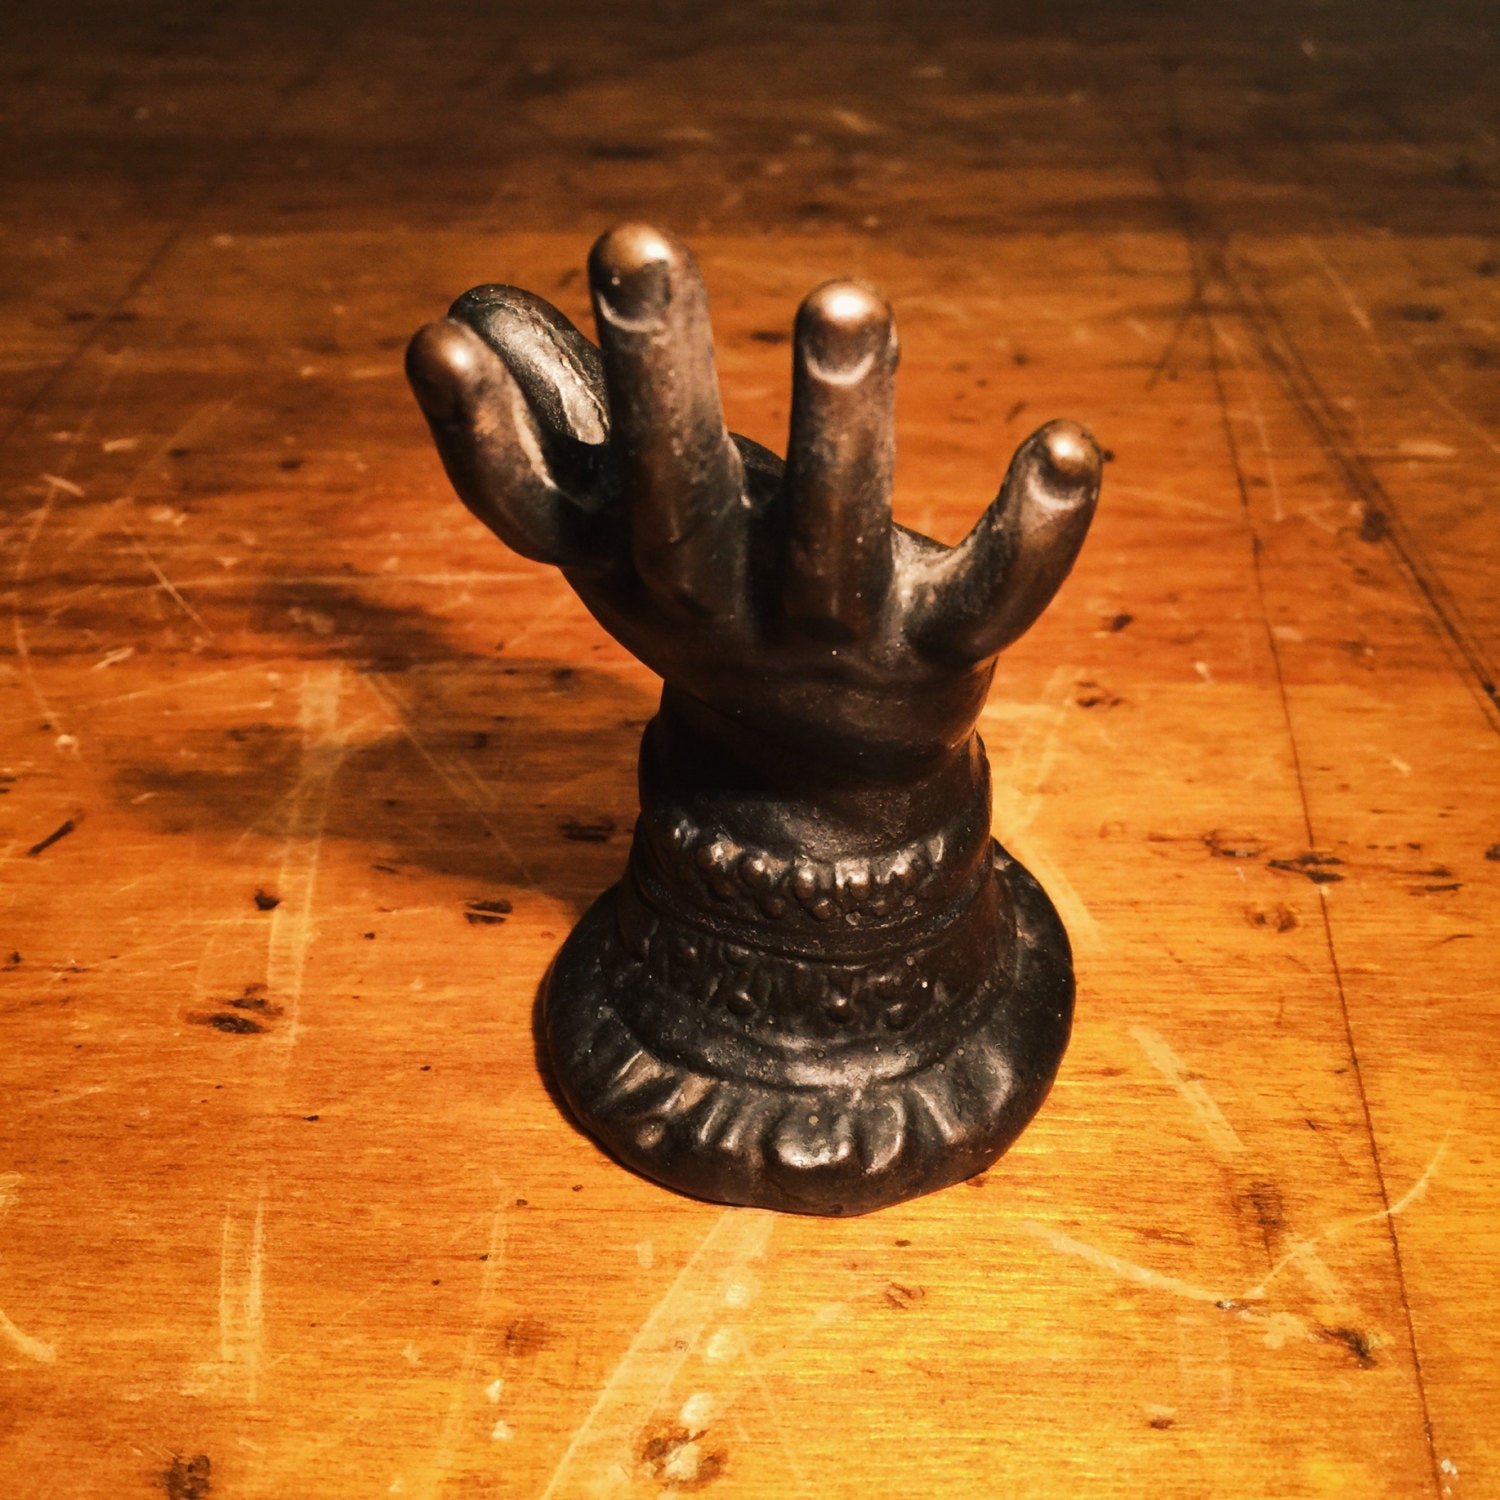 Rare Victorian Paperweight of a Creepy Hand - Cast Iron - Turn of the Century - Ornate Base - Antique - Unusual - Bizarre - Figural